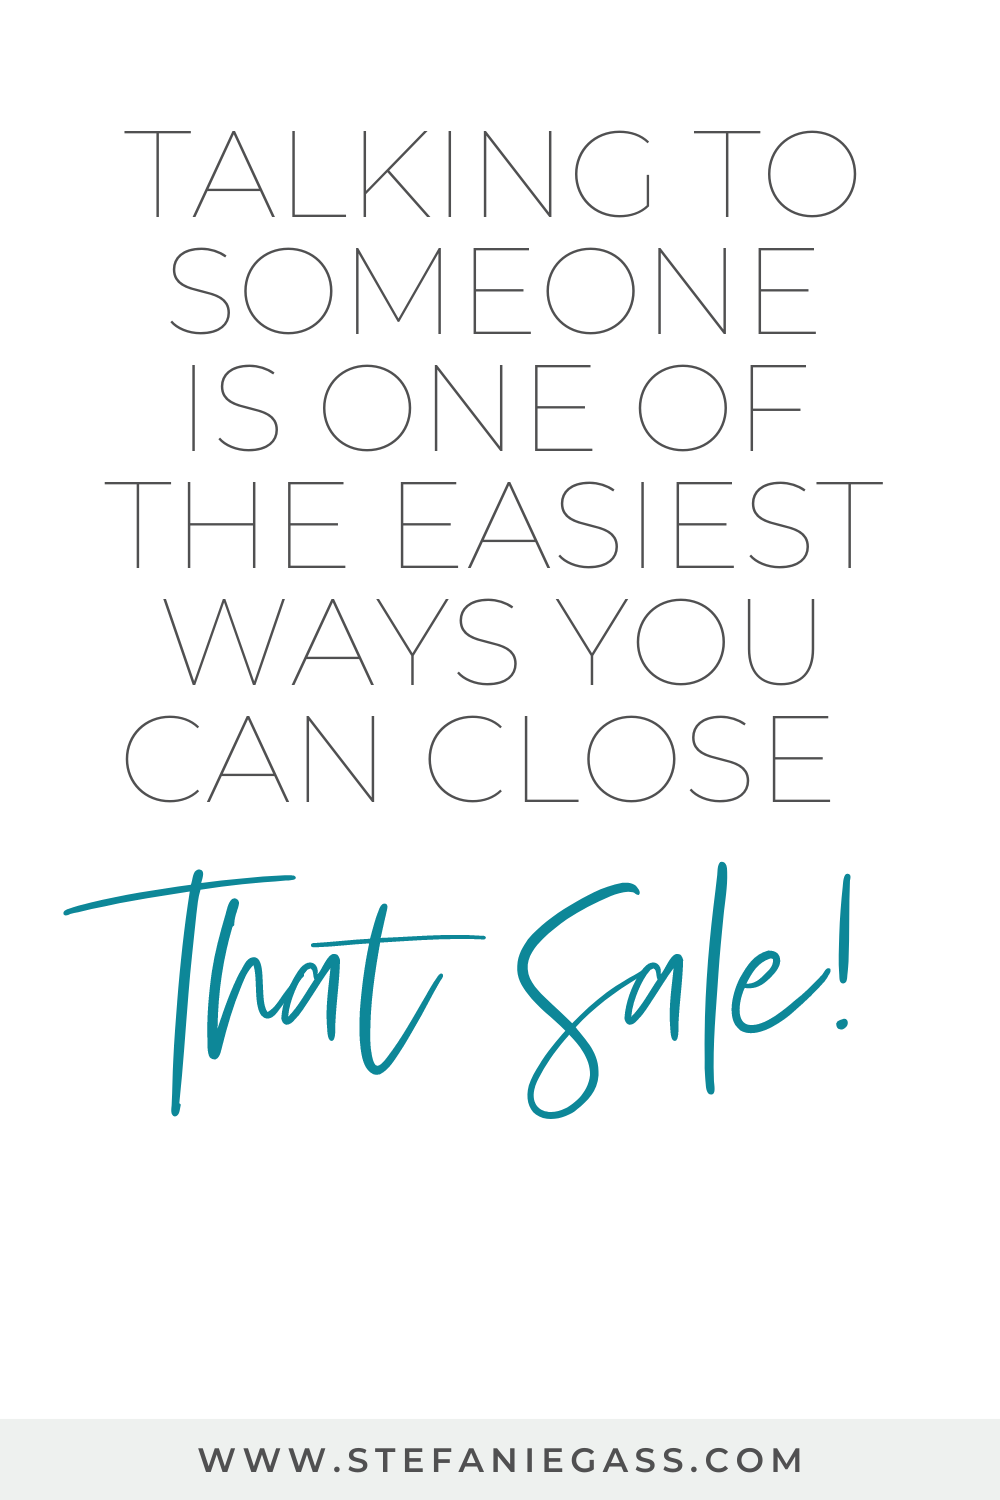 Text states "Talking to someone is one of the easiest ways you can close that sale!"